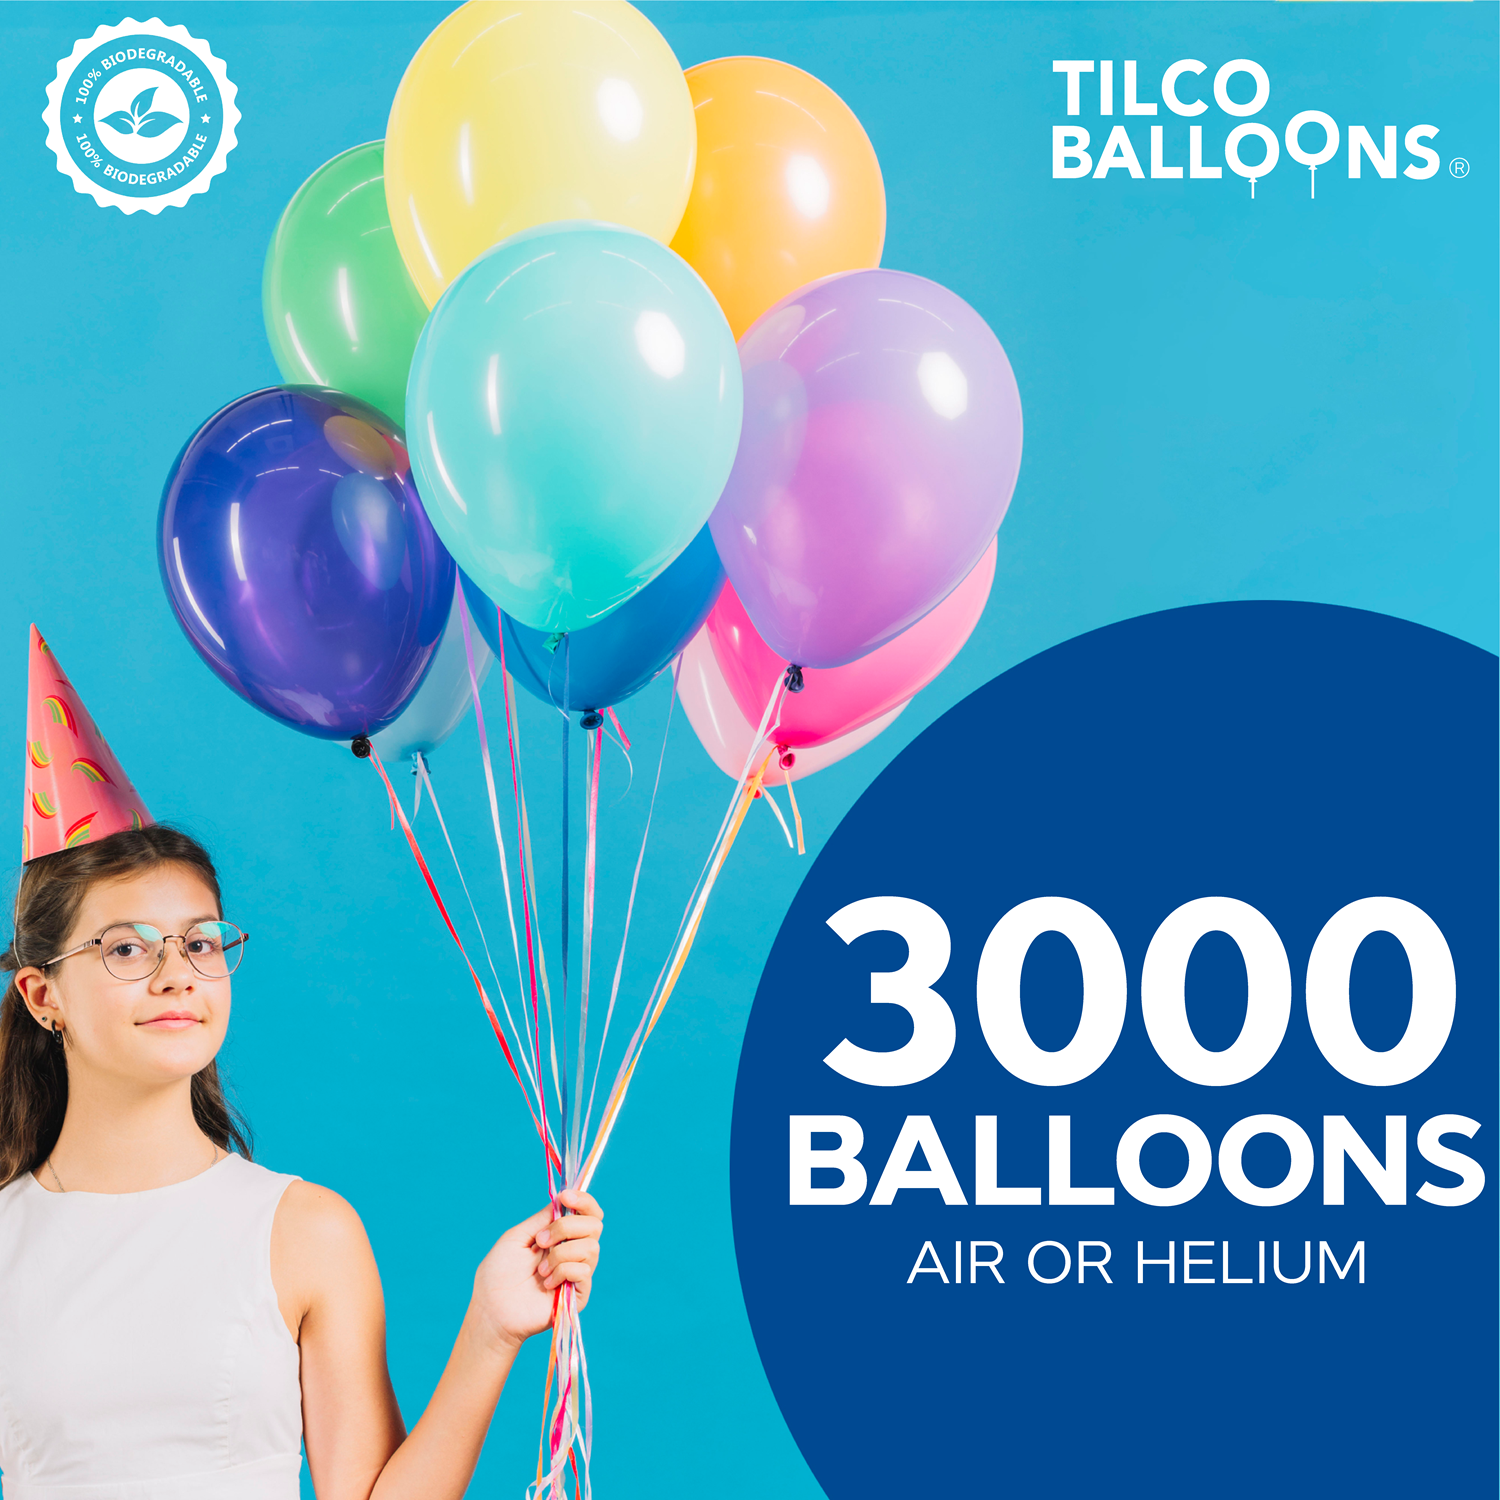 3000 assorted balloons for air or helium